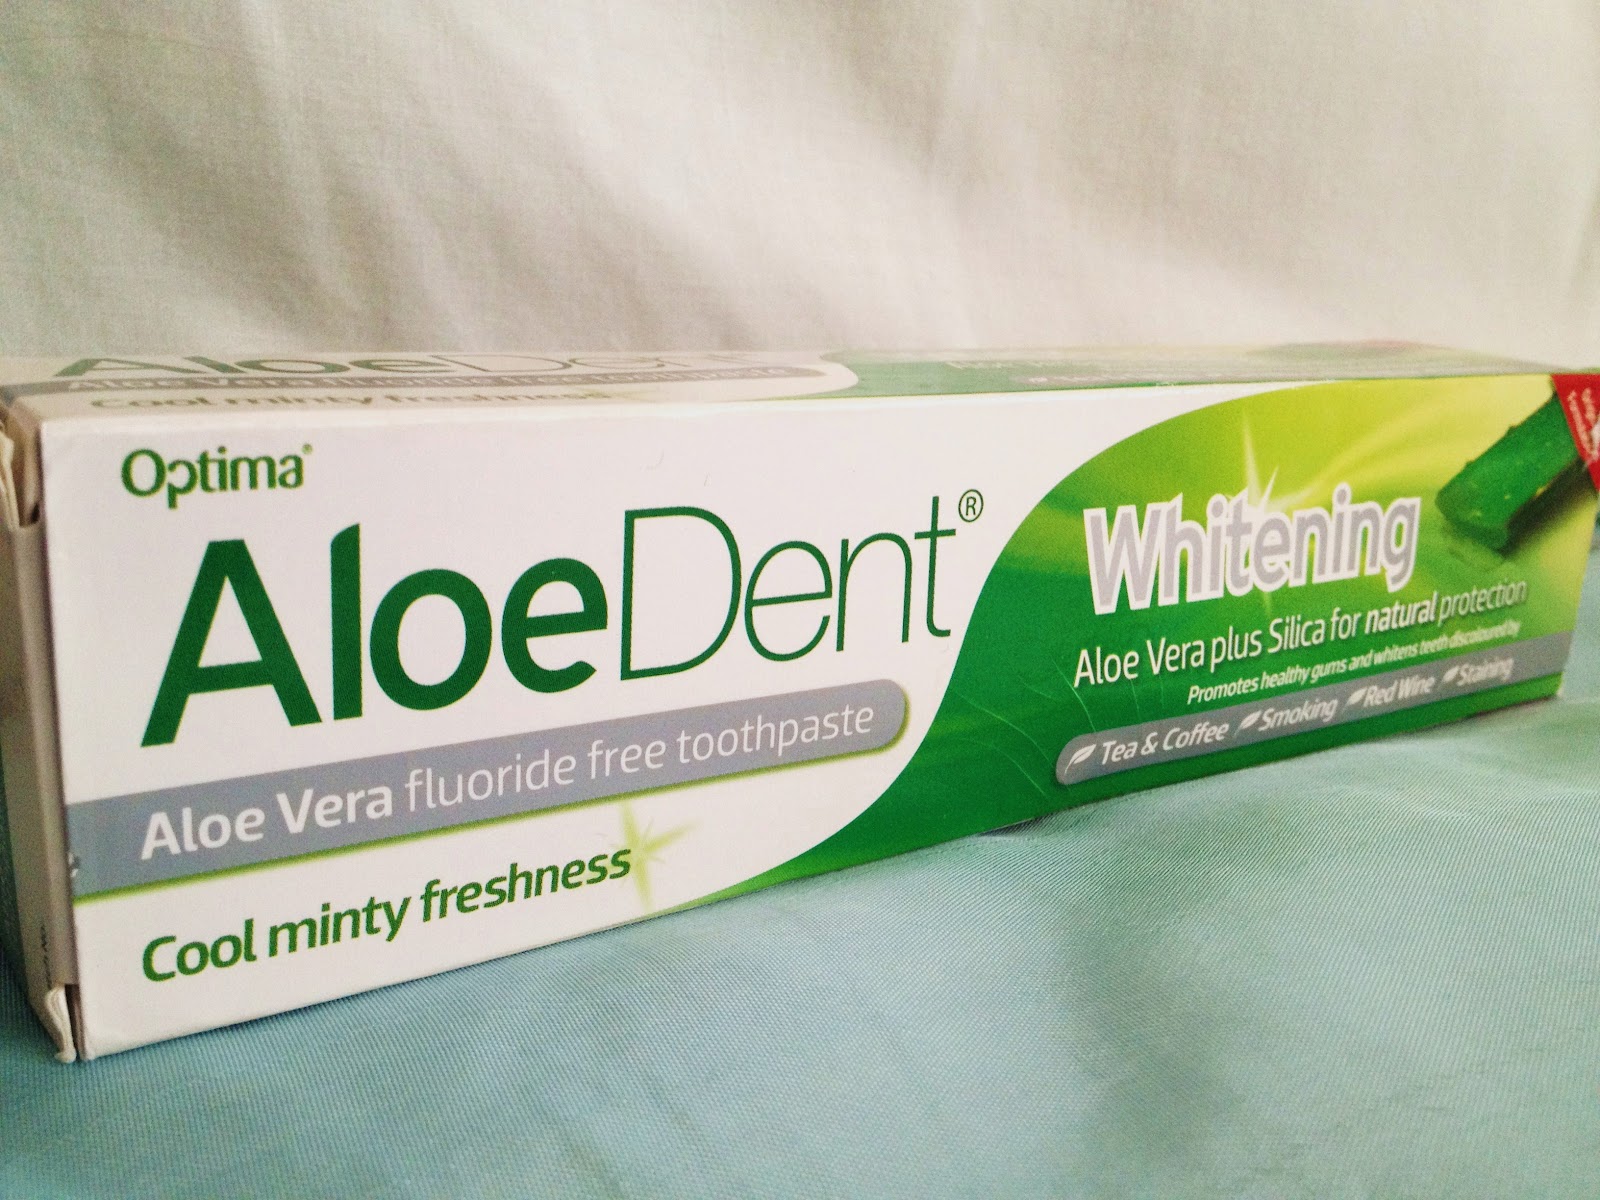 WELLBEING WISE: Natural toothpaste